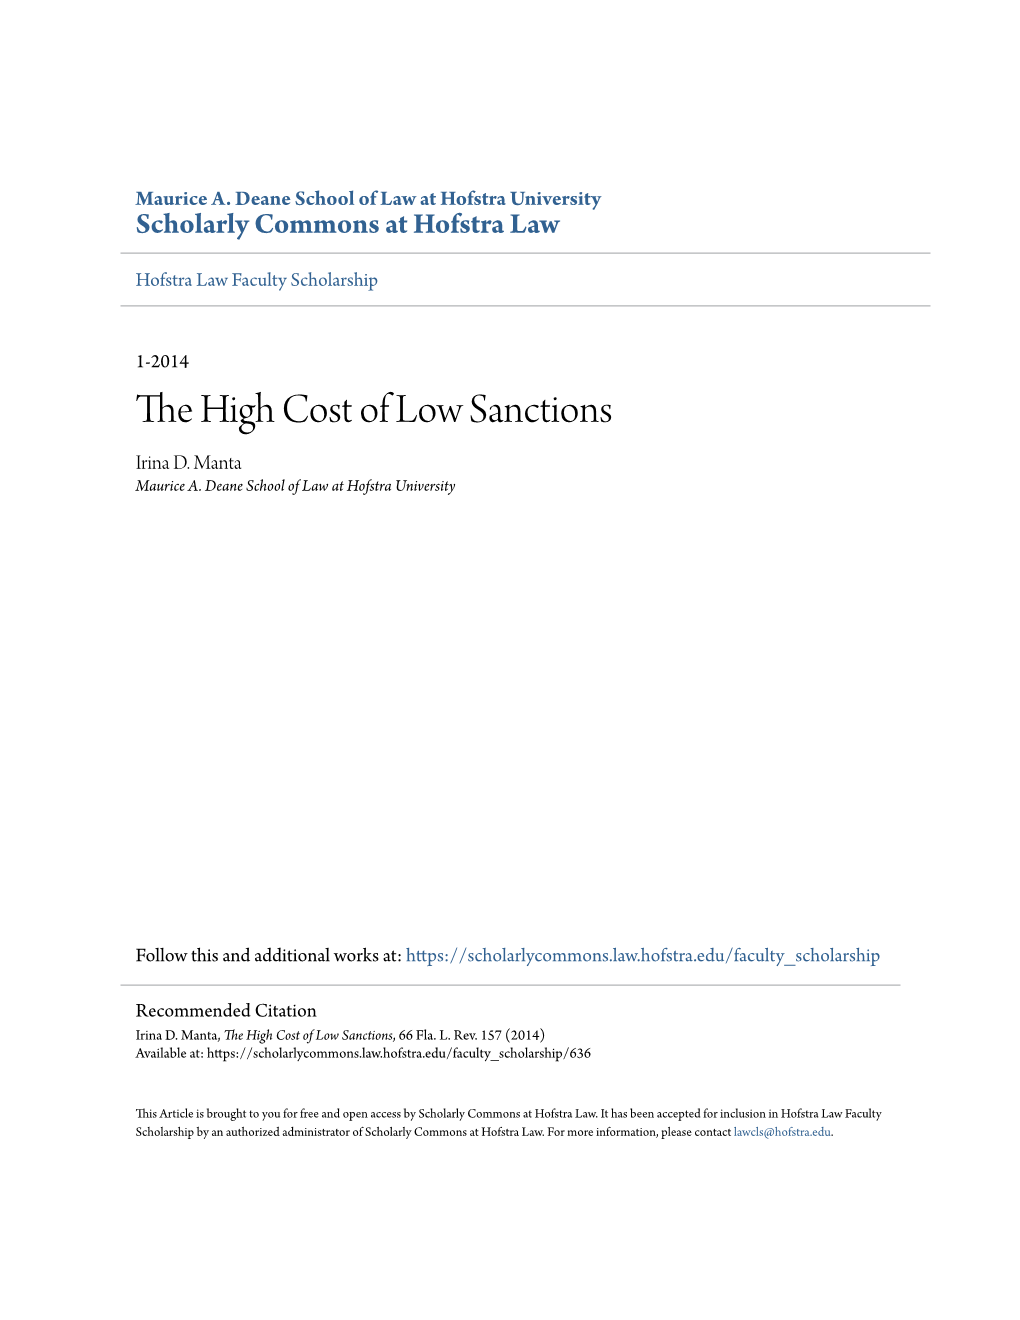 The High Cost of Low Sanctions, 66 Fla